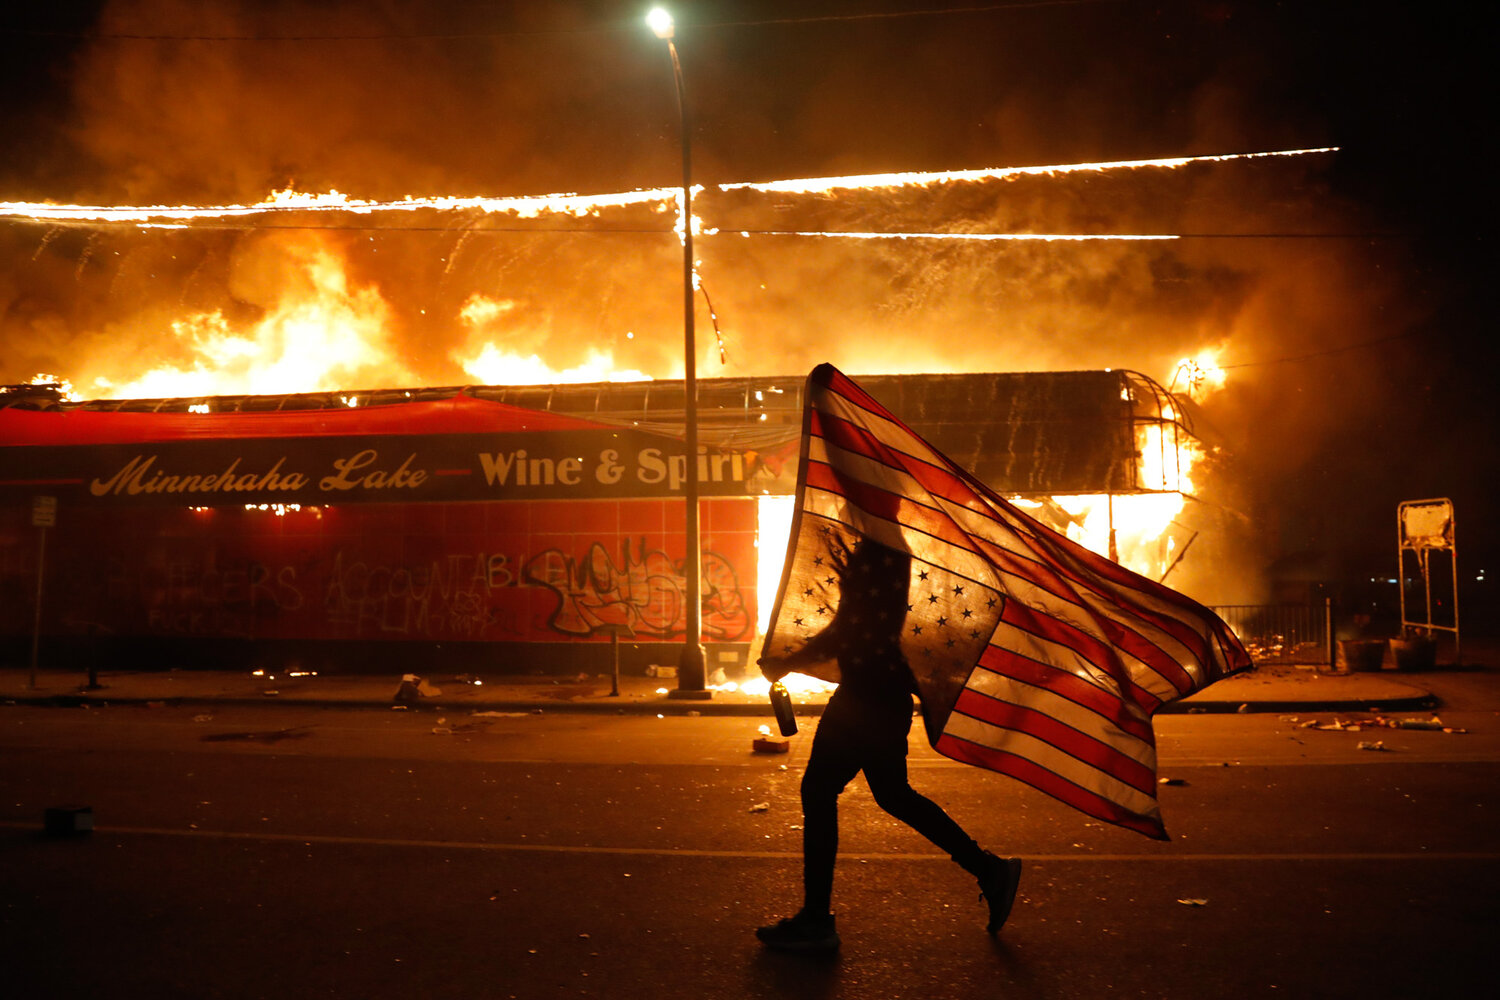  A protester carries a U.S. flag upside down as he walks past a burning building in Minneapolis on May 28, 2020, during a protest over the death of George Floyd, a Black man who died after a white Minneapolis police officer pressed a knee into his neck for several minutes. (AP Photo/Julio Cortez) 